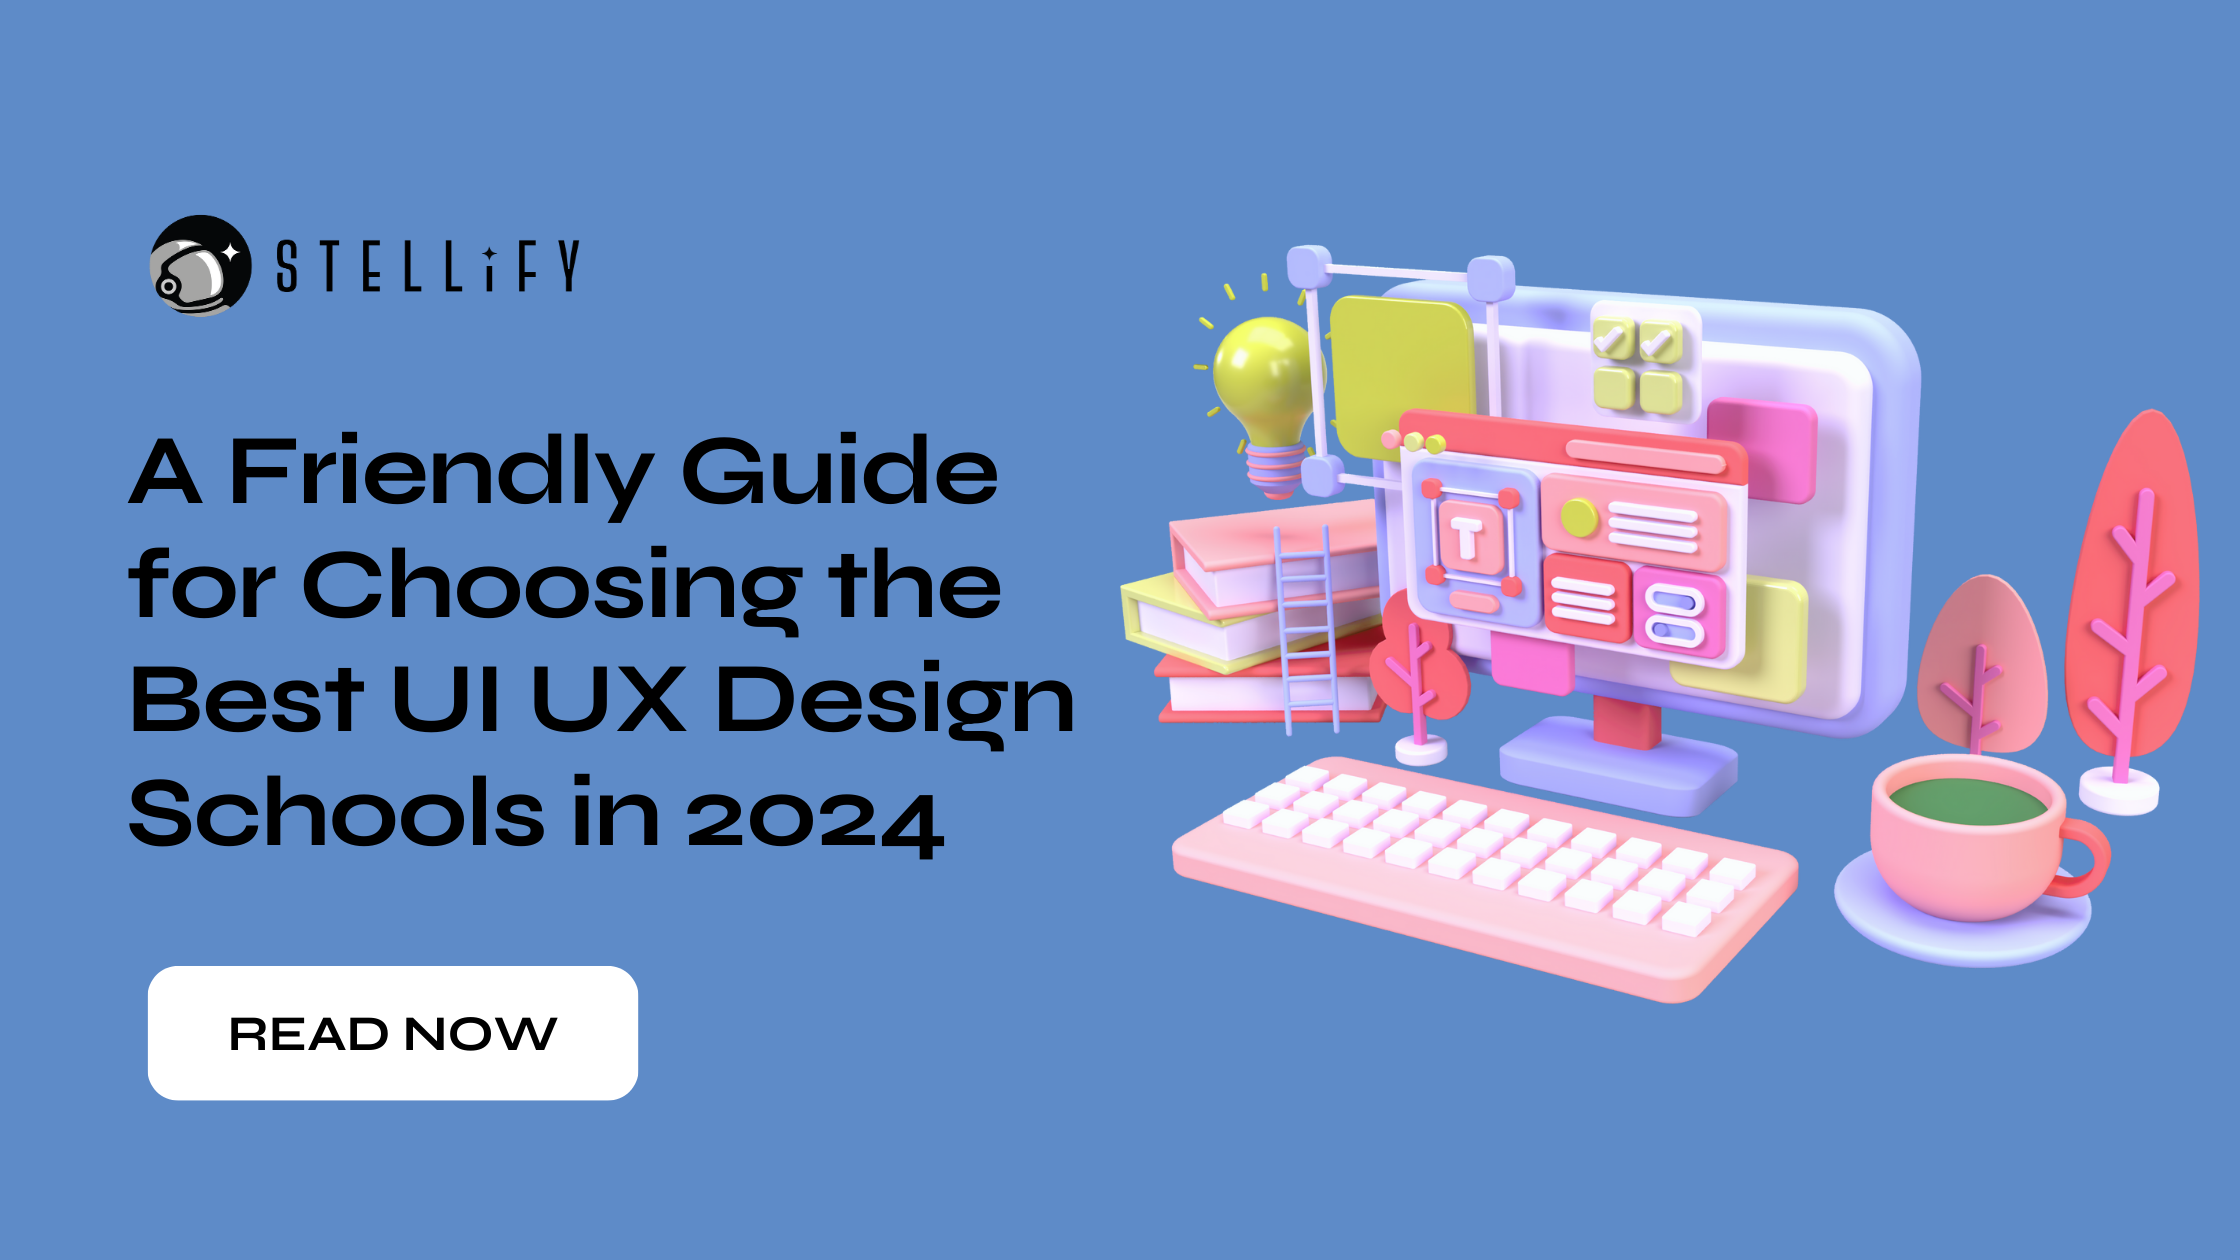 A Friendly Guide for Choosing the Best UI UX Design Schools in 2024